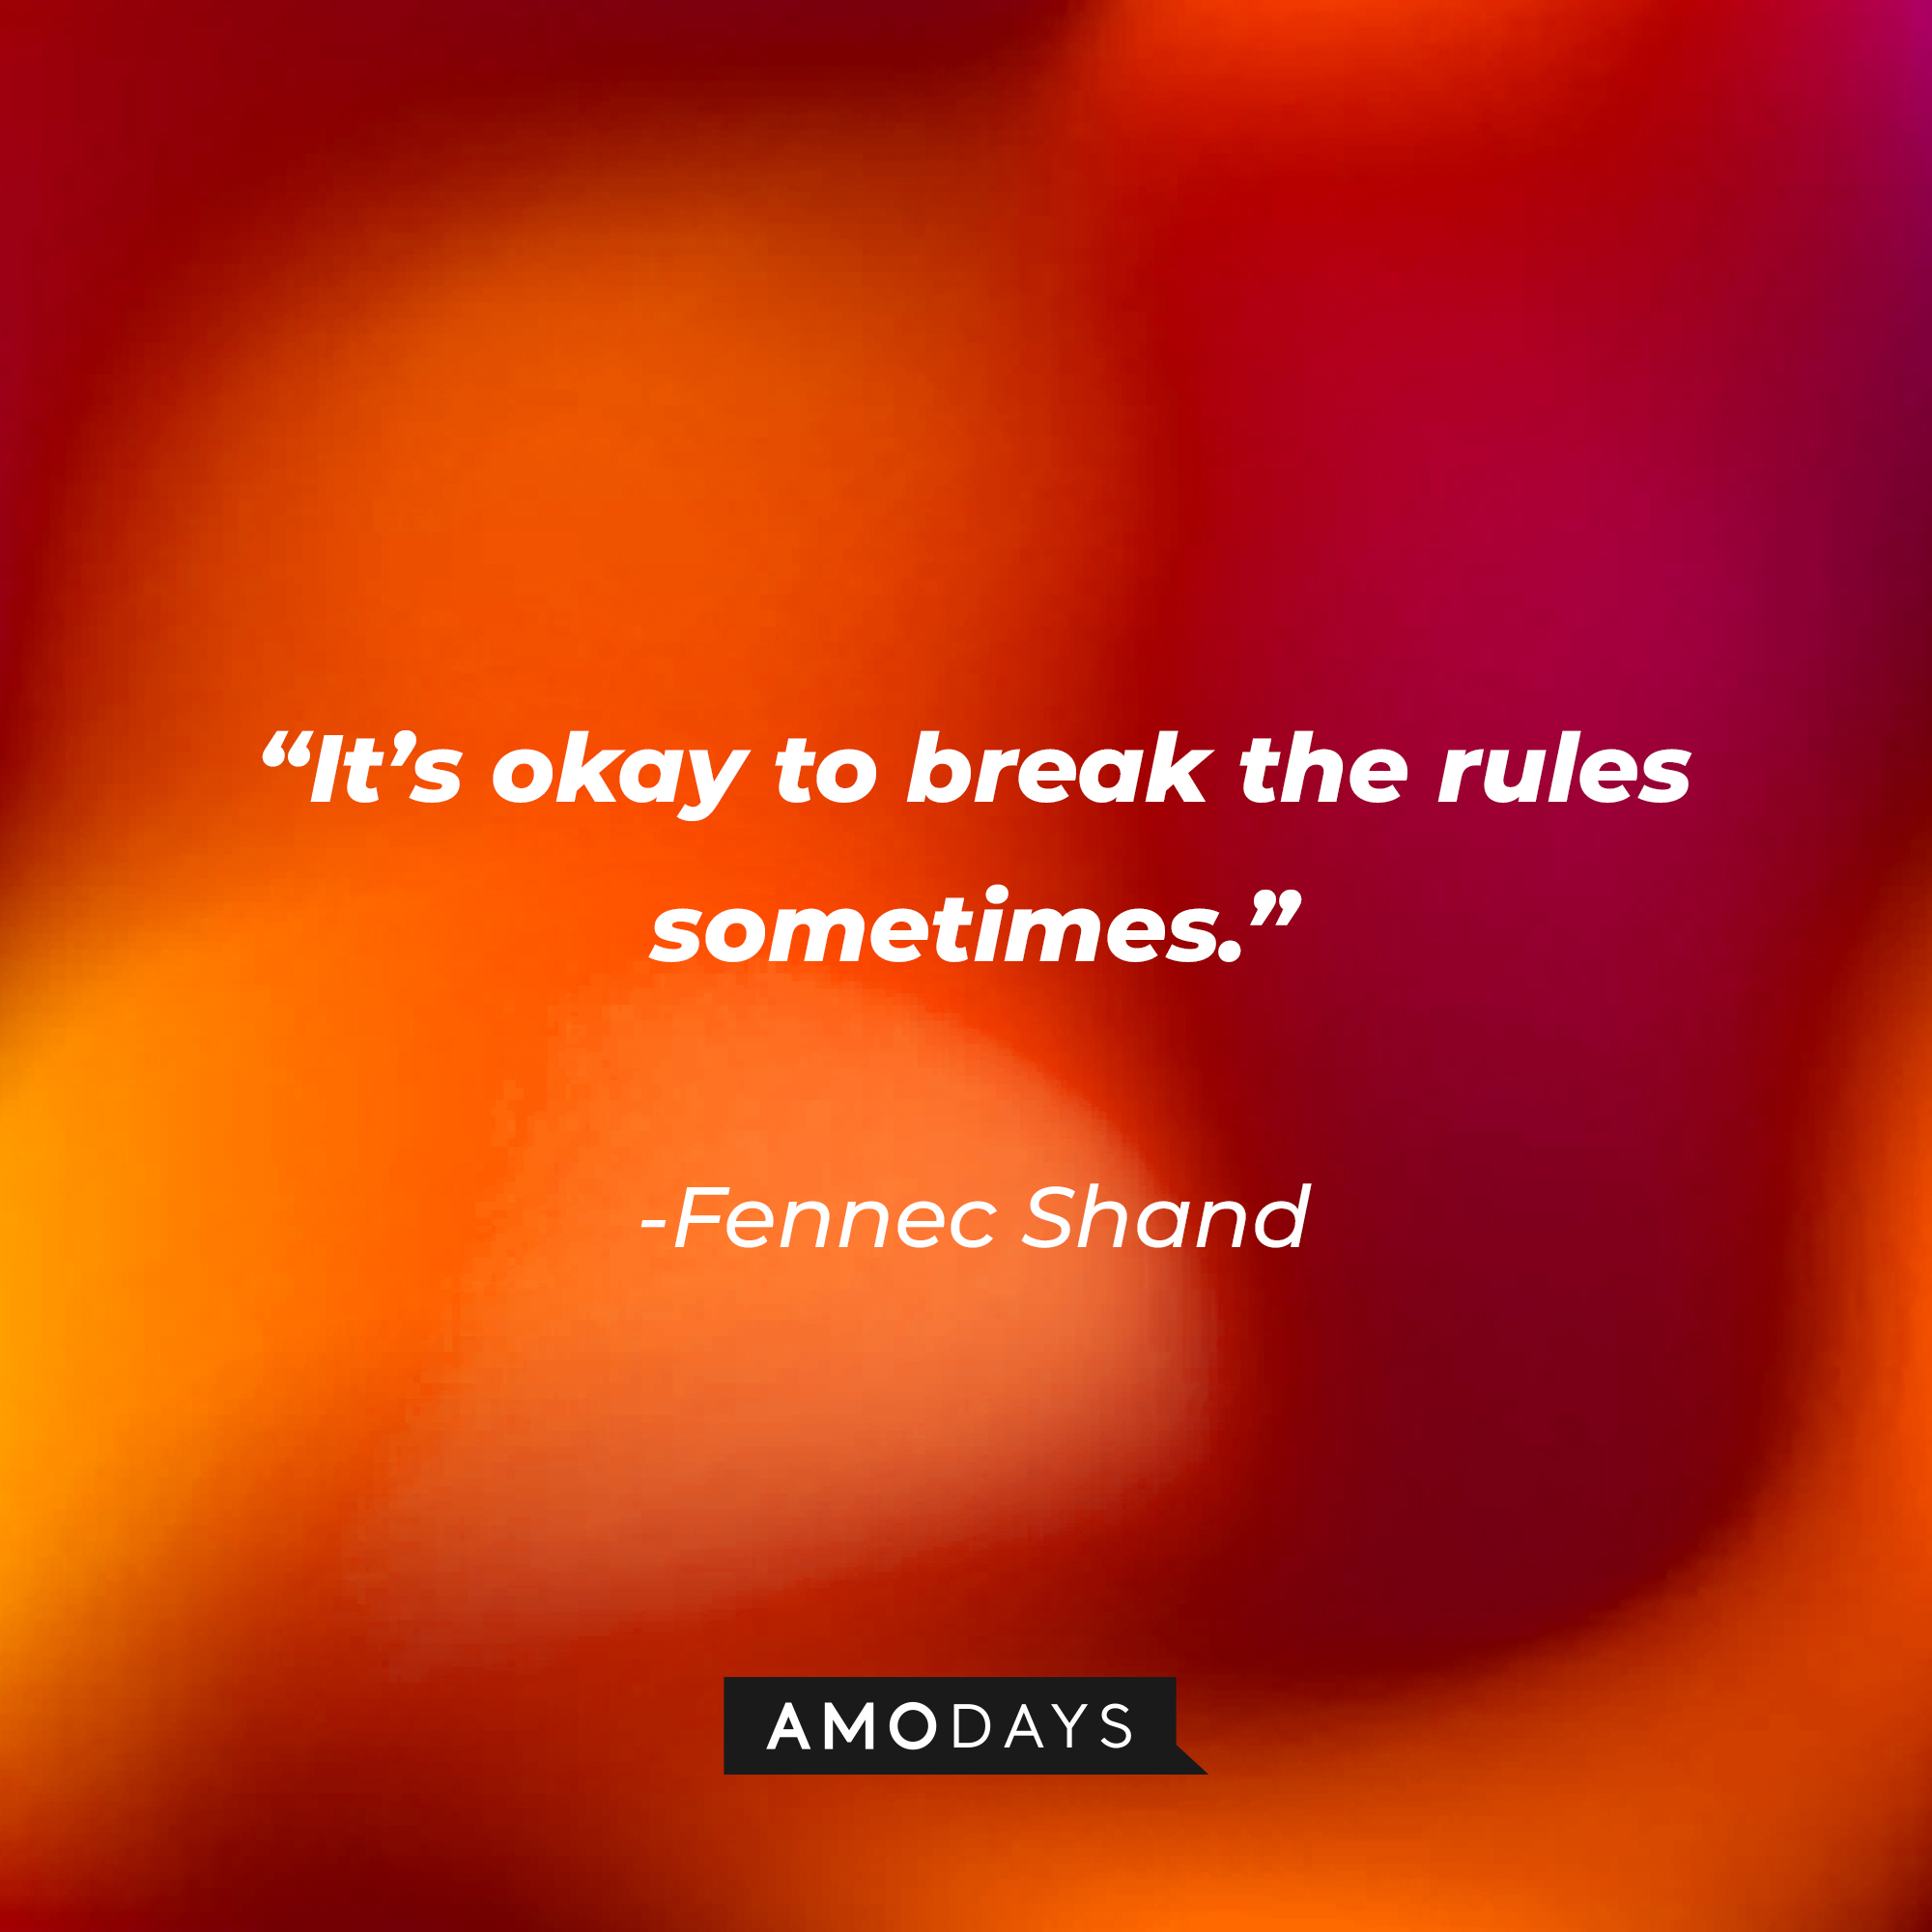 Fennec Shand’s quote: “It’s okay to break the rules sometimes.” | Source: AmoDays